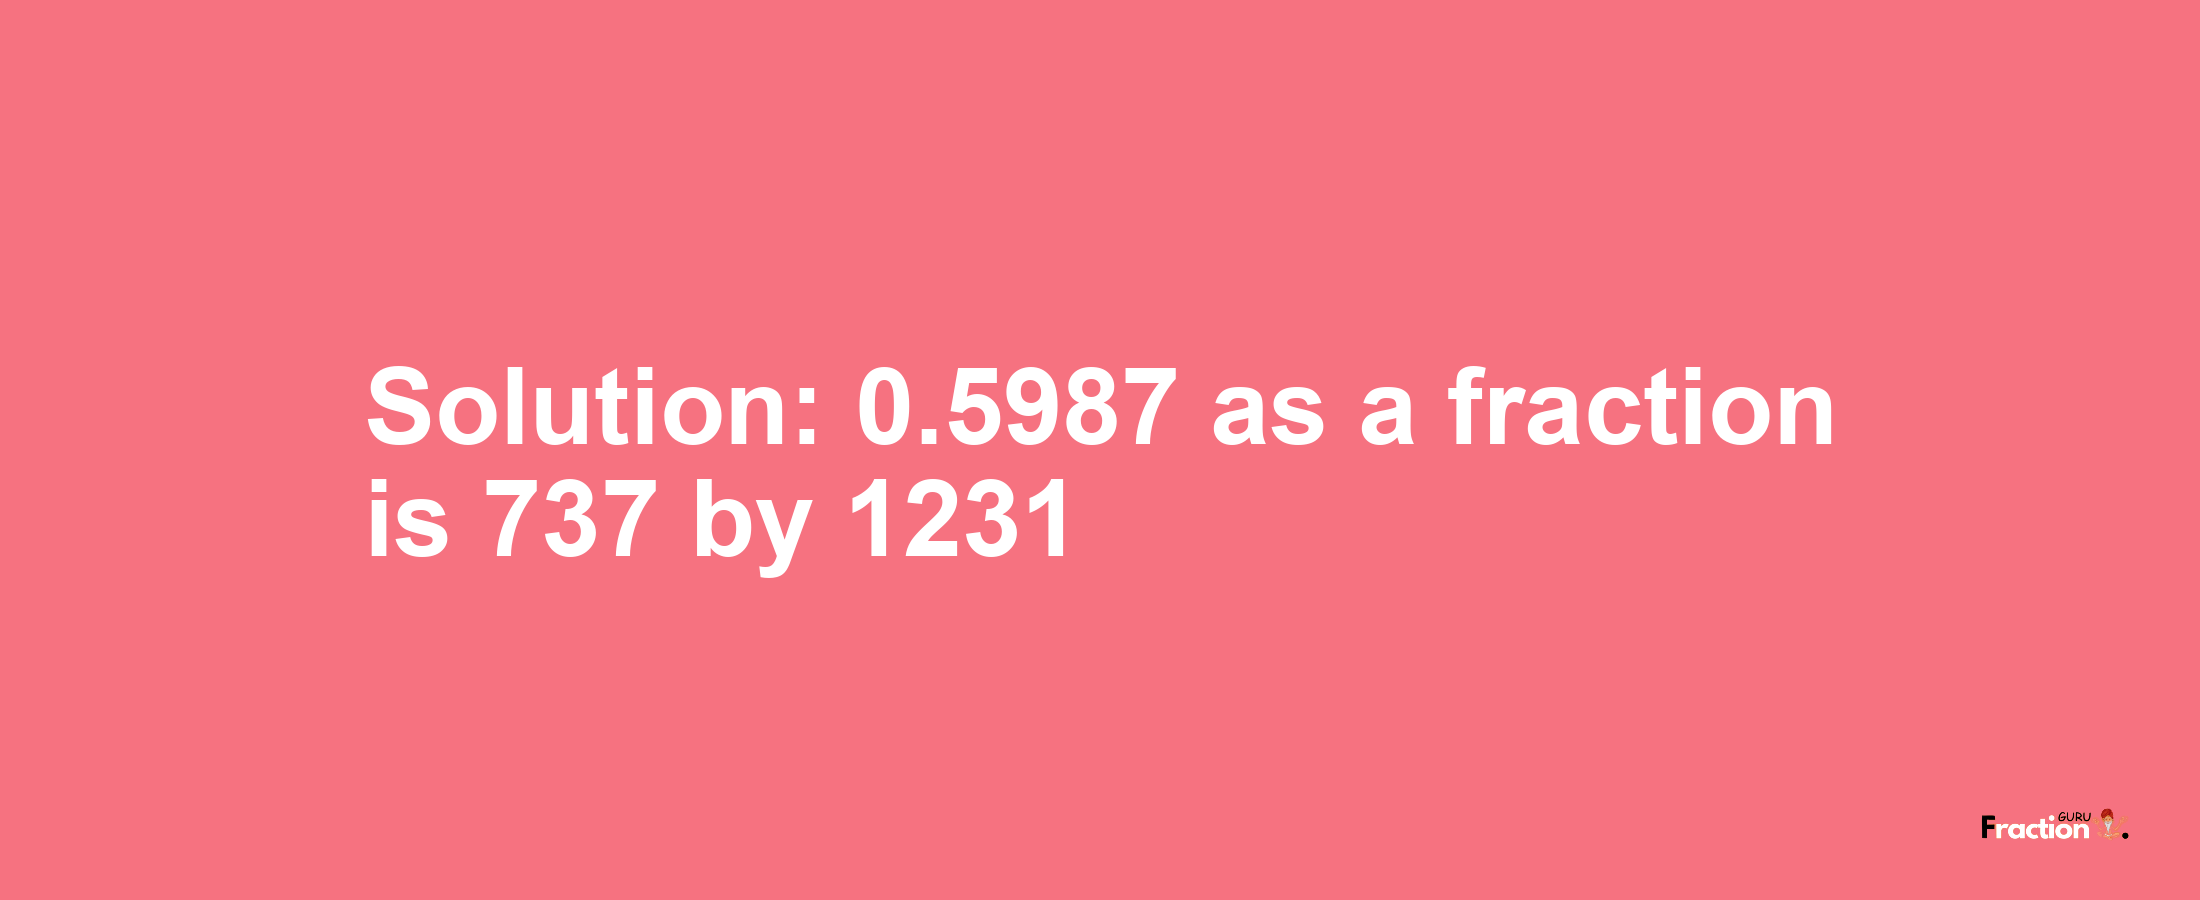 Solution:0.5987 as a fraction is 737/1231